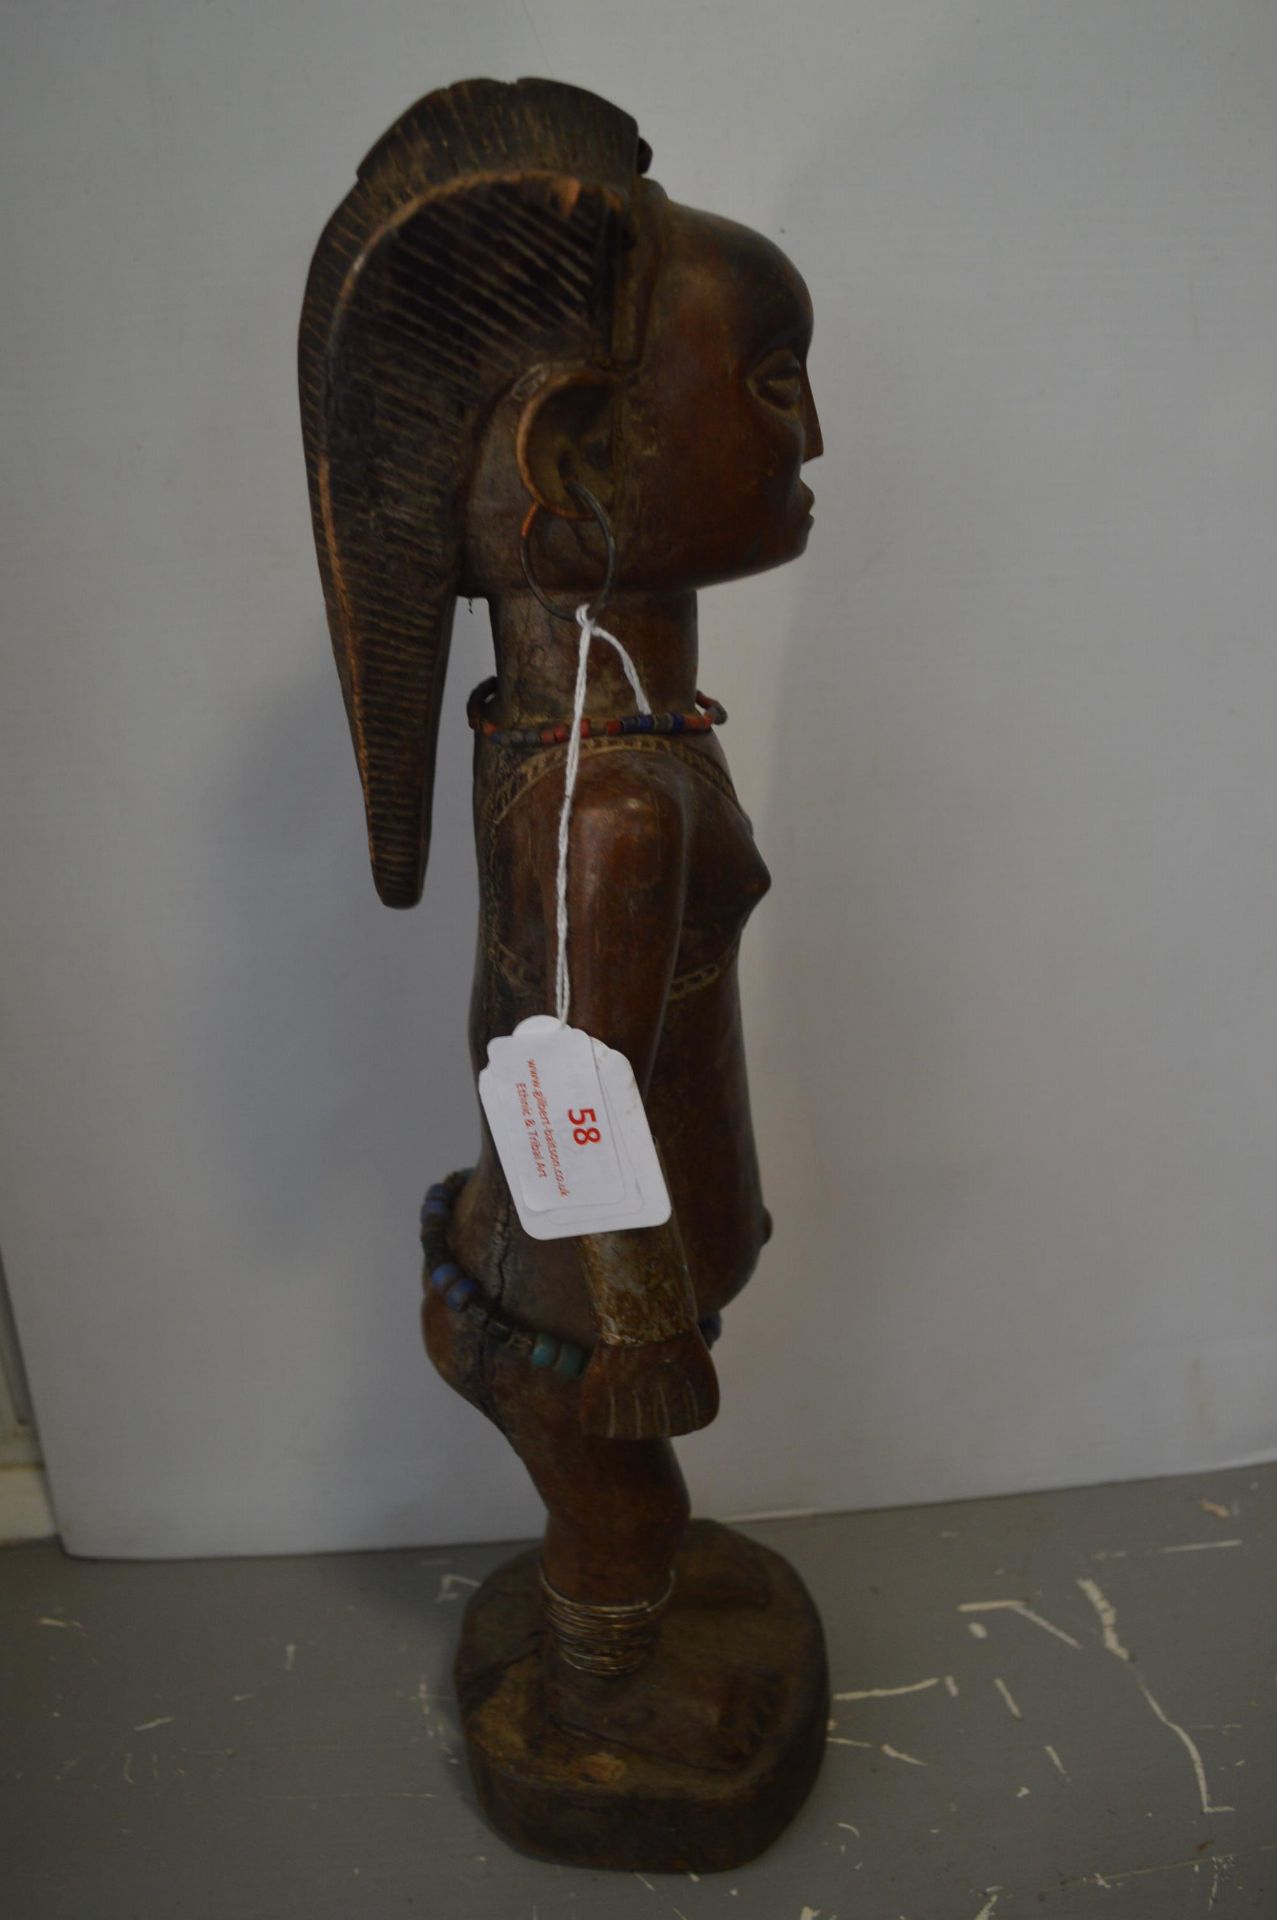 Senufo Carved Wooden Tribal Figure with Beaded and Metal Decoration - Image 4 of 4